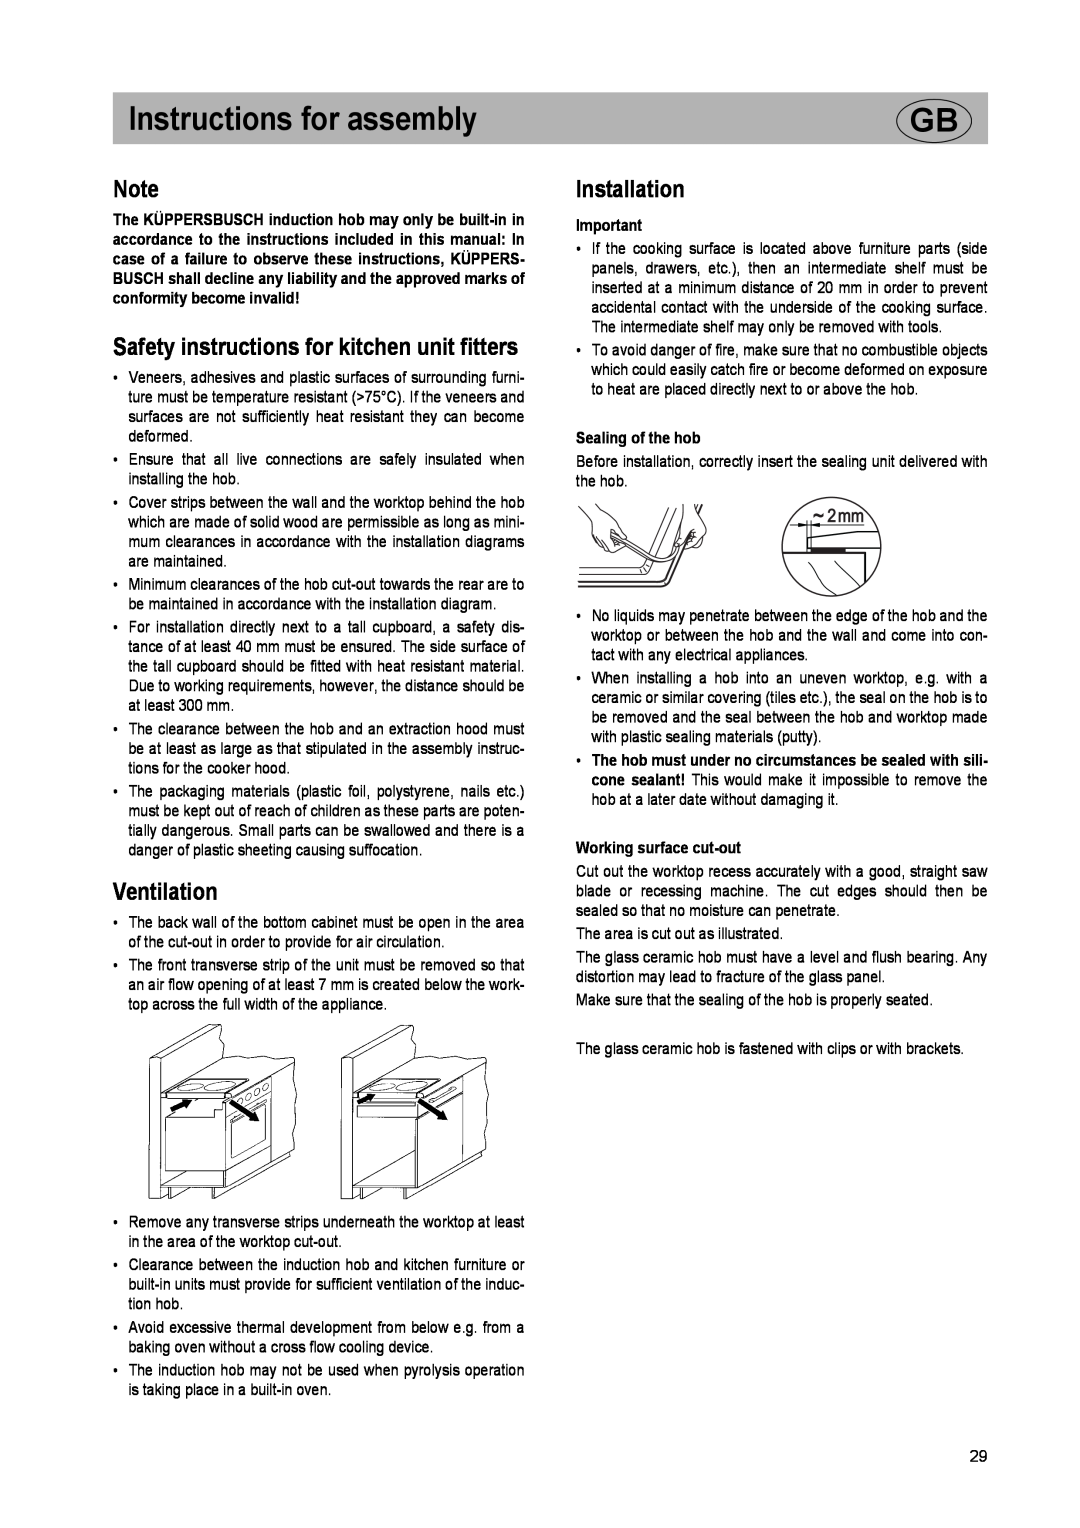 Kuppersbusch USA EKI 407.0M Instructions for assembly, Safety instructions for kitchen unit fitters, Ventilation 